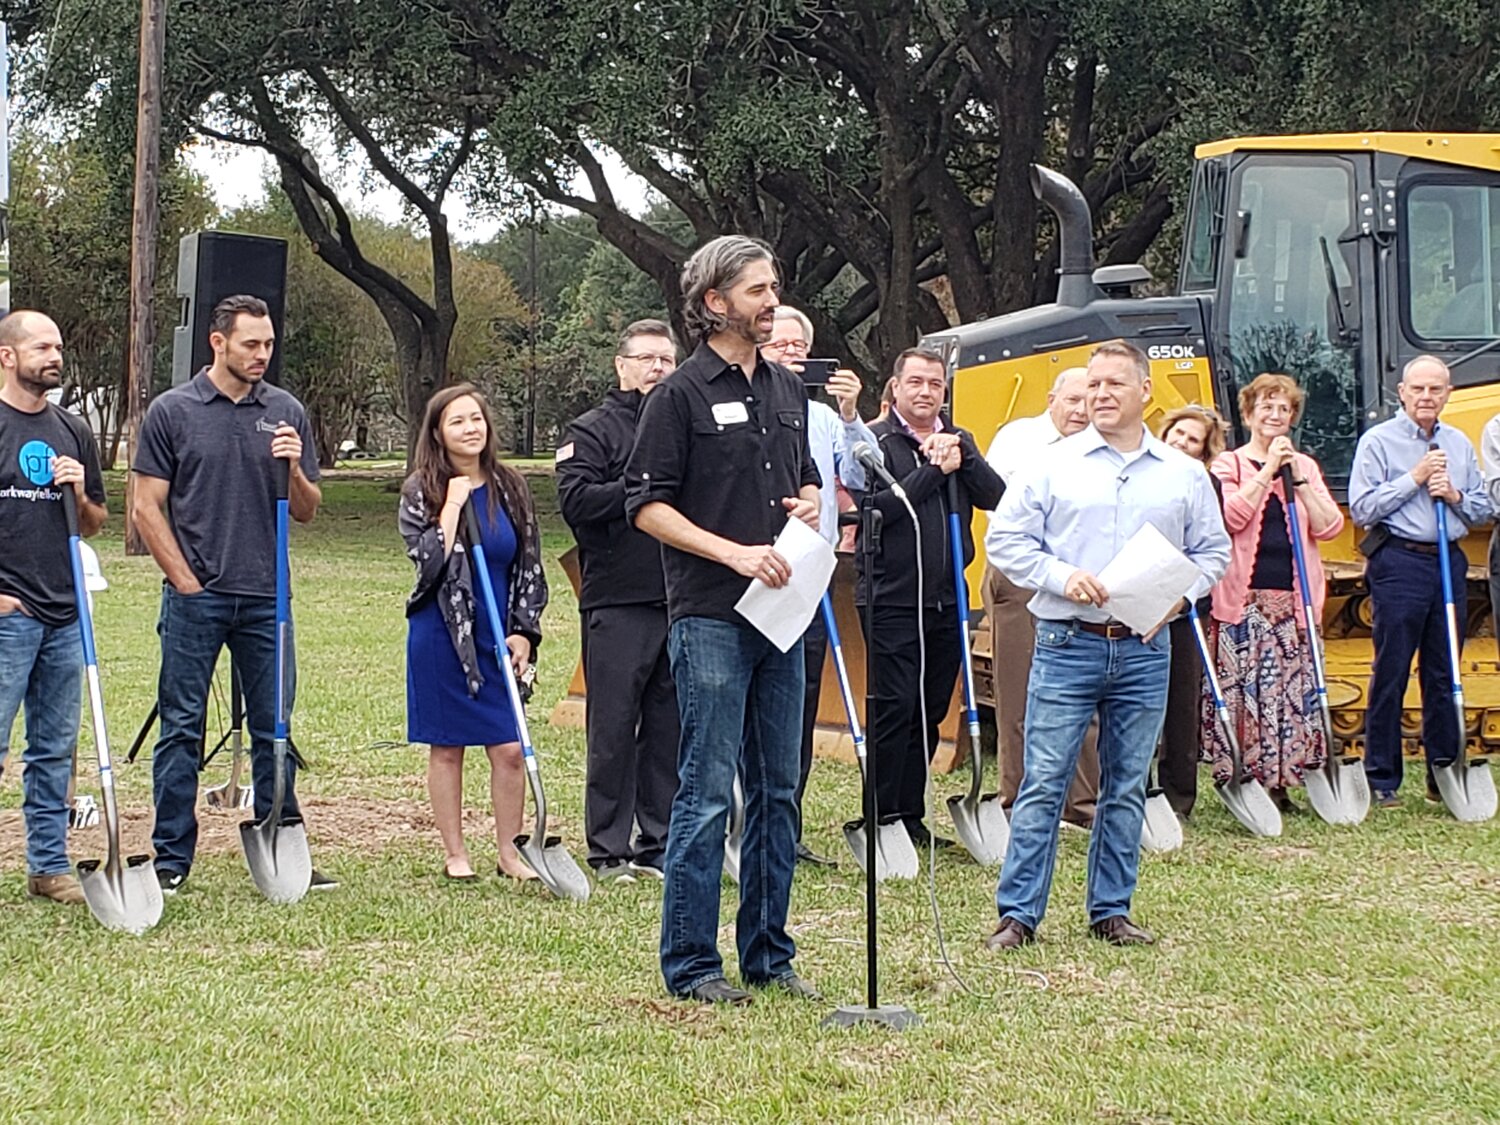 Adam Jungeblut (center), residency director at Parkway Fellowship’s north Katy campus, leads the groundbreaking ceremony held November 19th at the church’s new location at 5911 Morton Road in Katy. Senior Pastor Mike McGowan (right, in white) also spoke at the event, which attracted a large crowd of several hundred people.